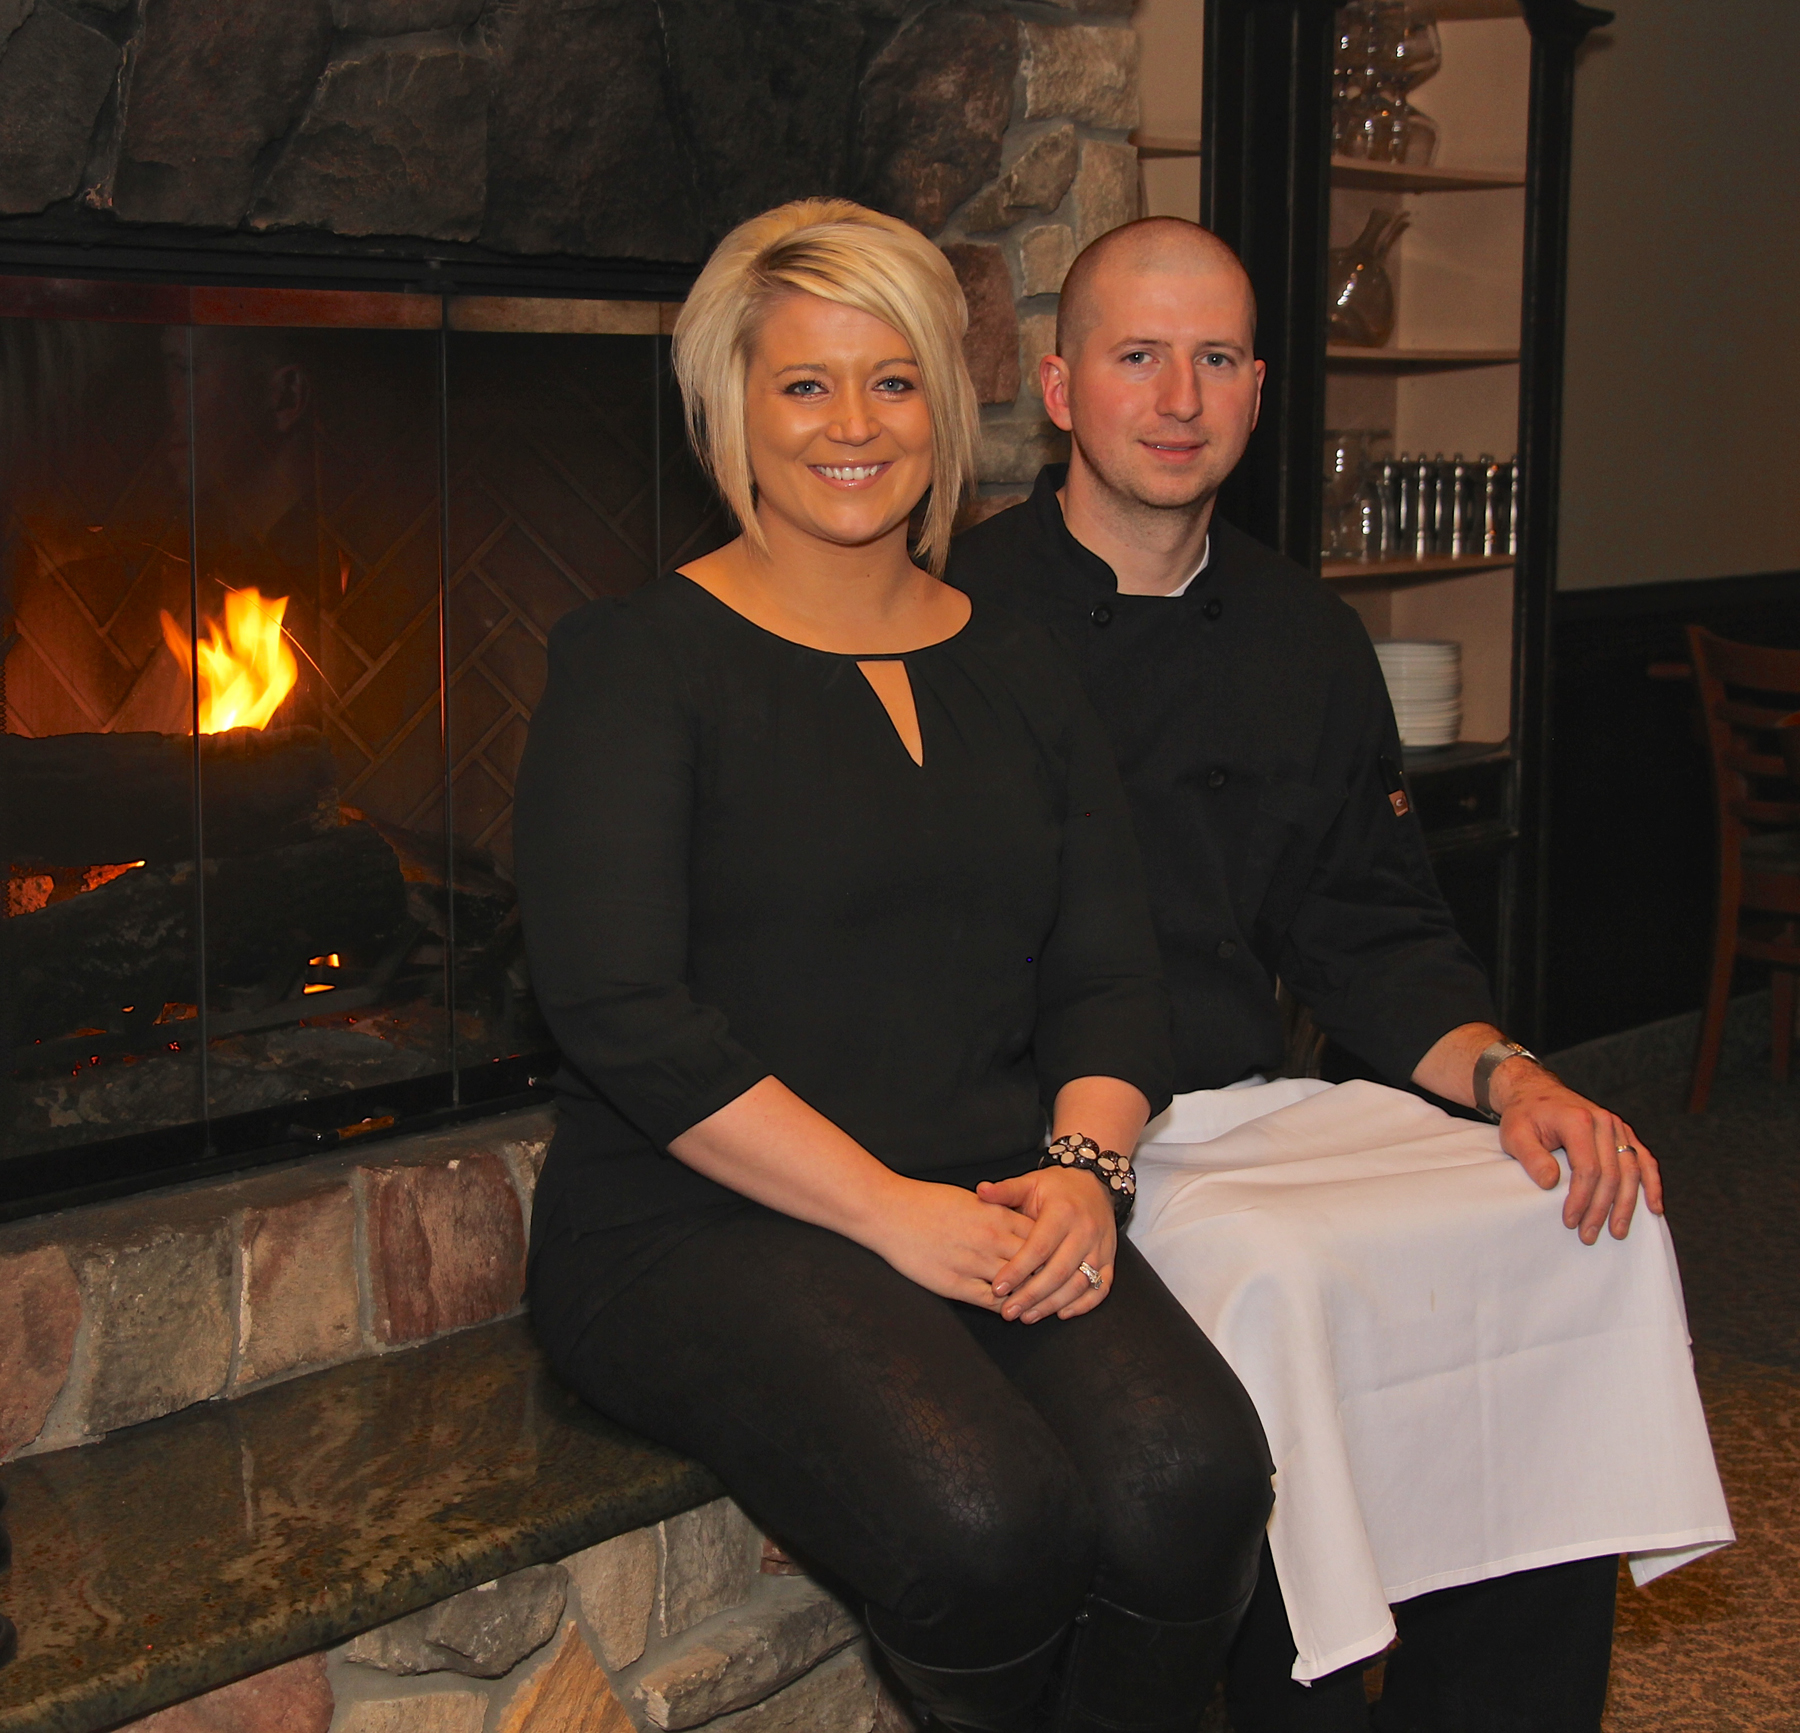 Chef St. Clair and wife Alison are looking forward to bringing their talents to John Palmer's Bistro 44